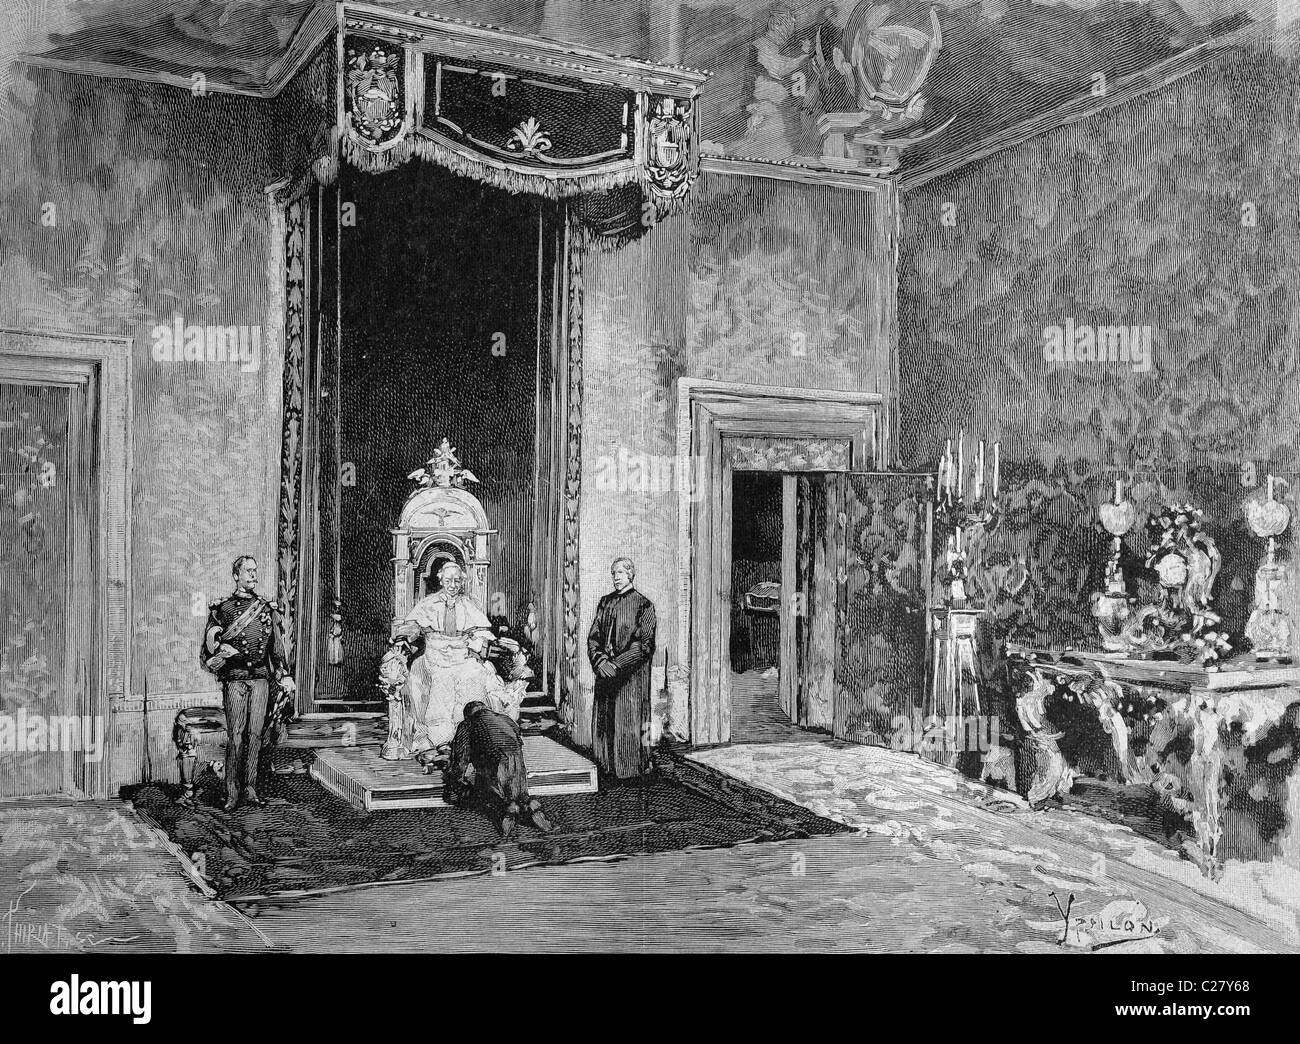 Audience with Pope Leo XIII., historical illustration, ca. 1893 Stock Photo